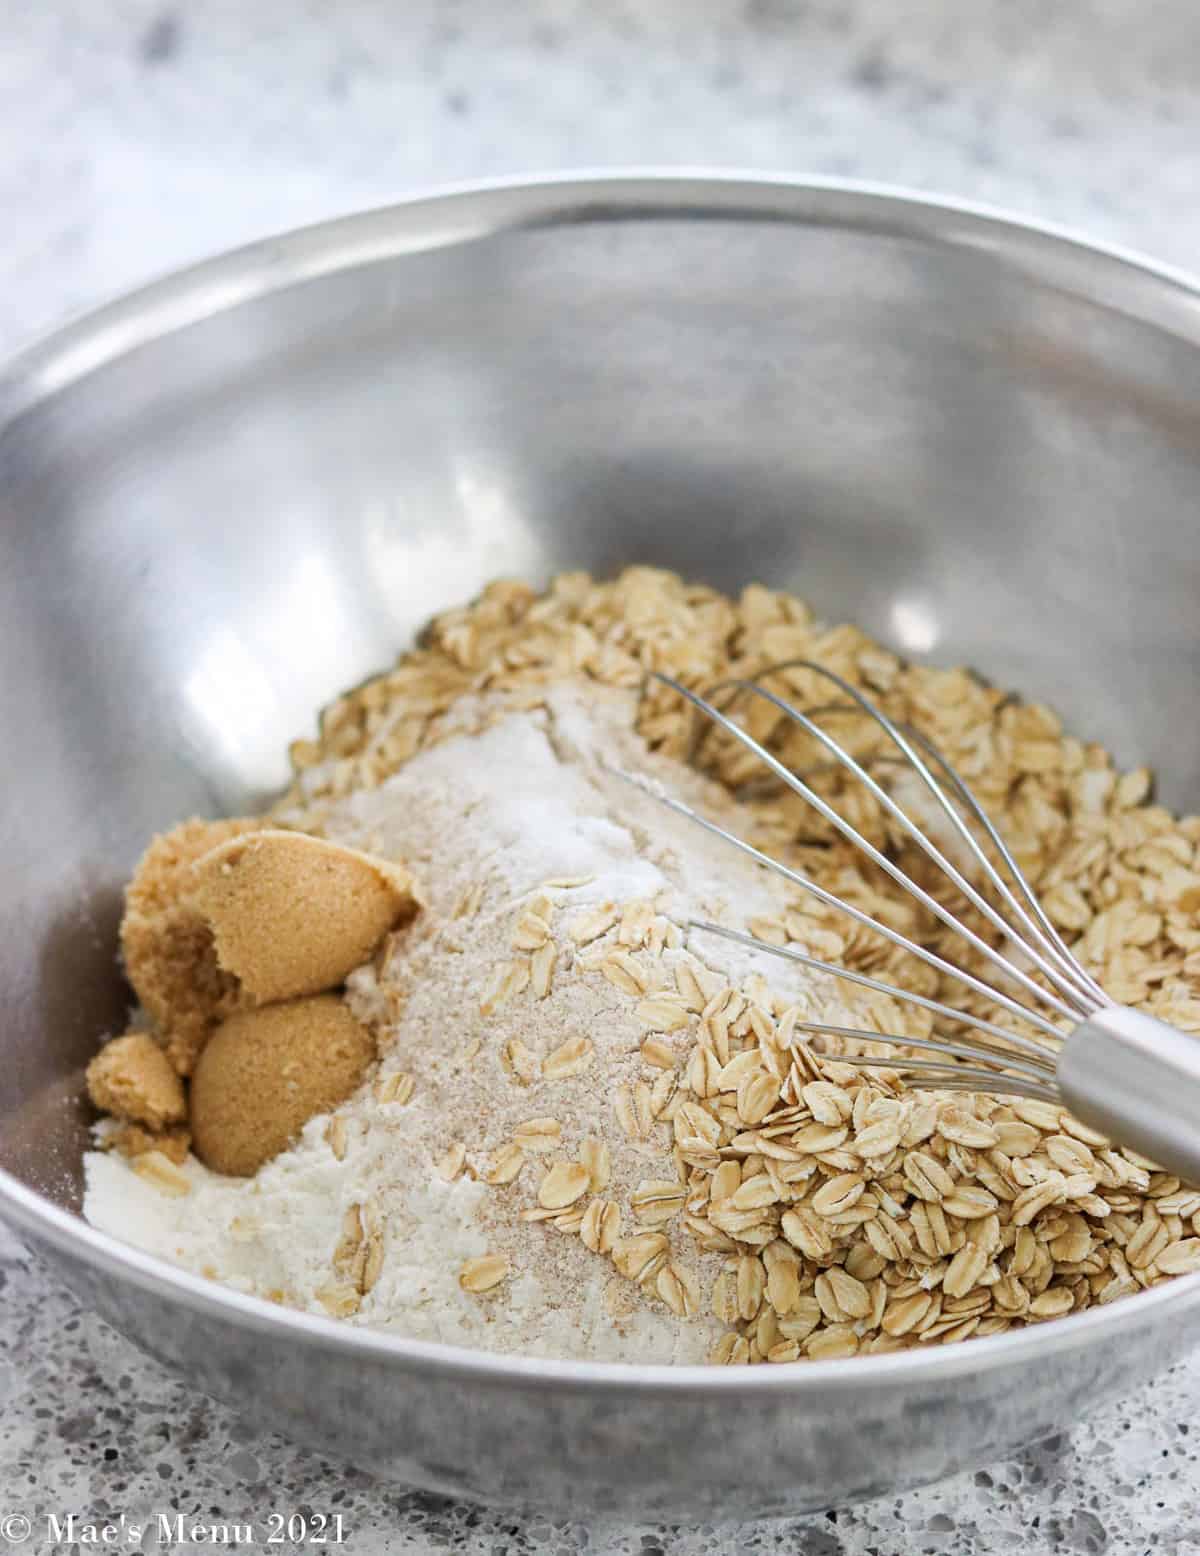 The dry ingredients for the oatmeal bread in a large mixing bowl